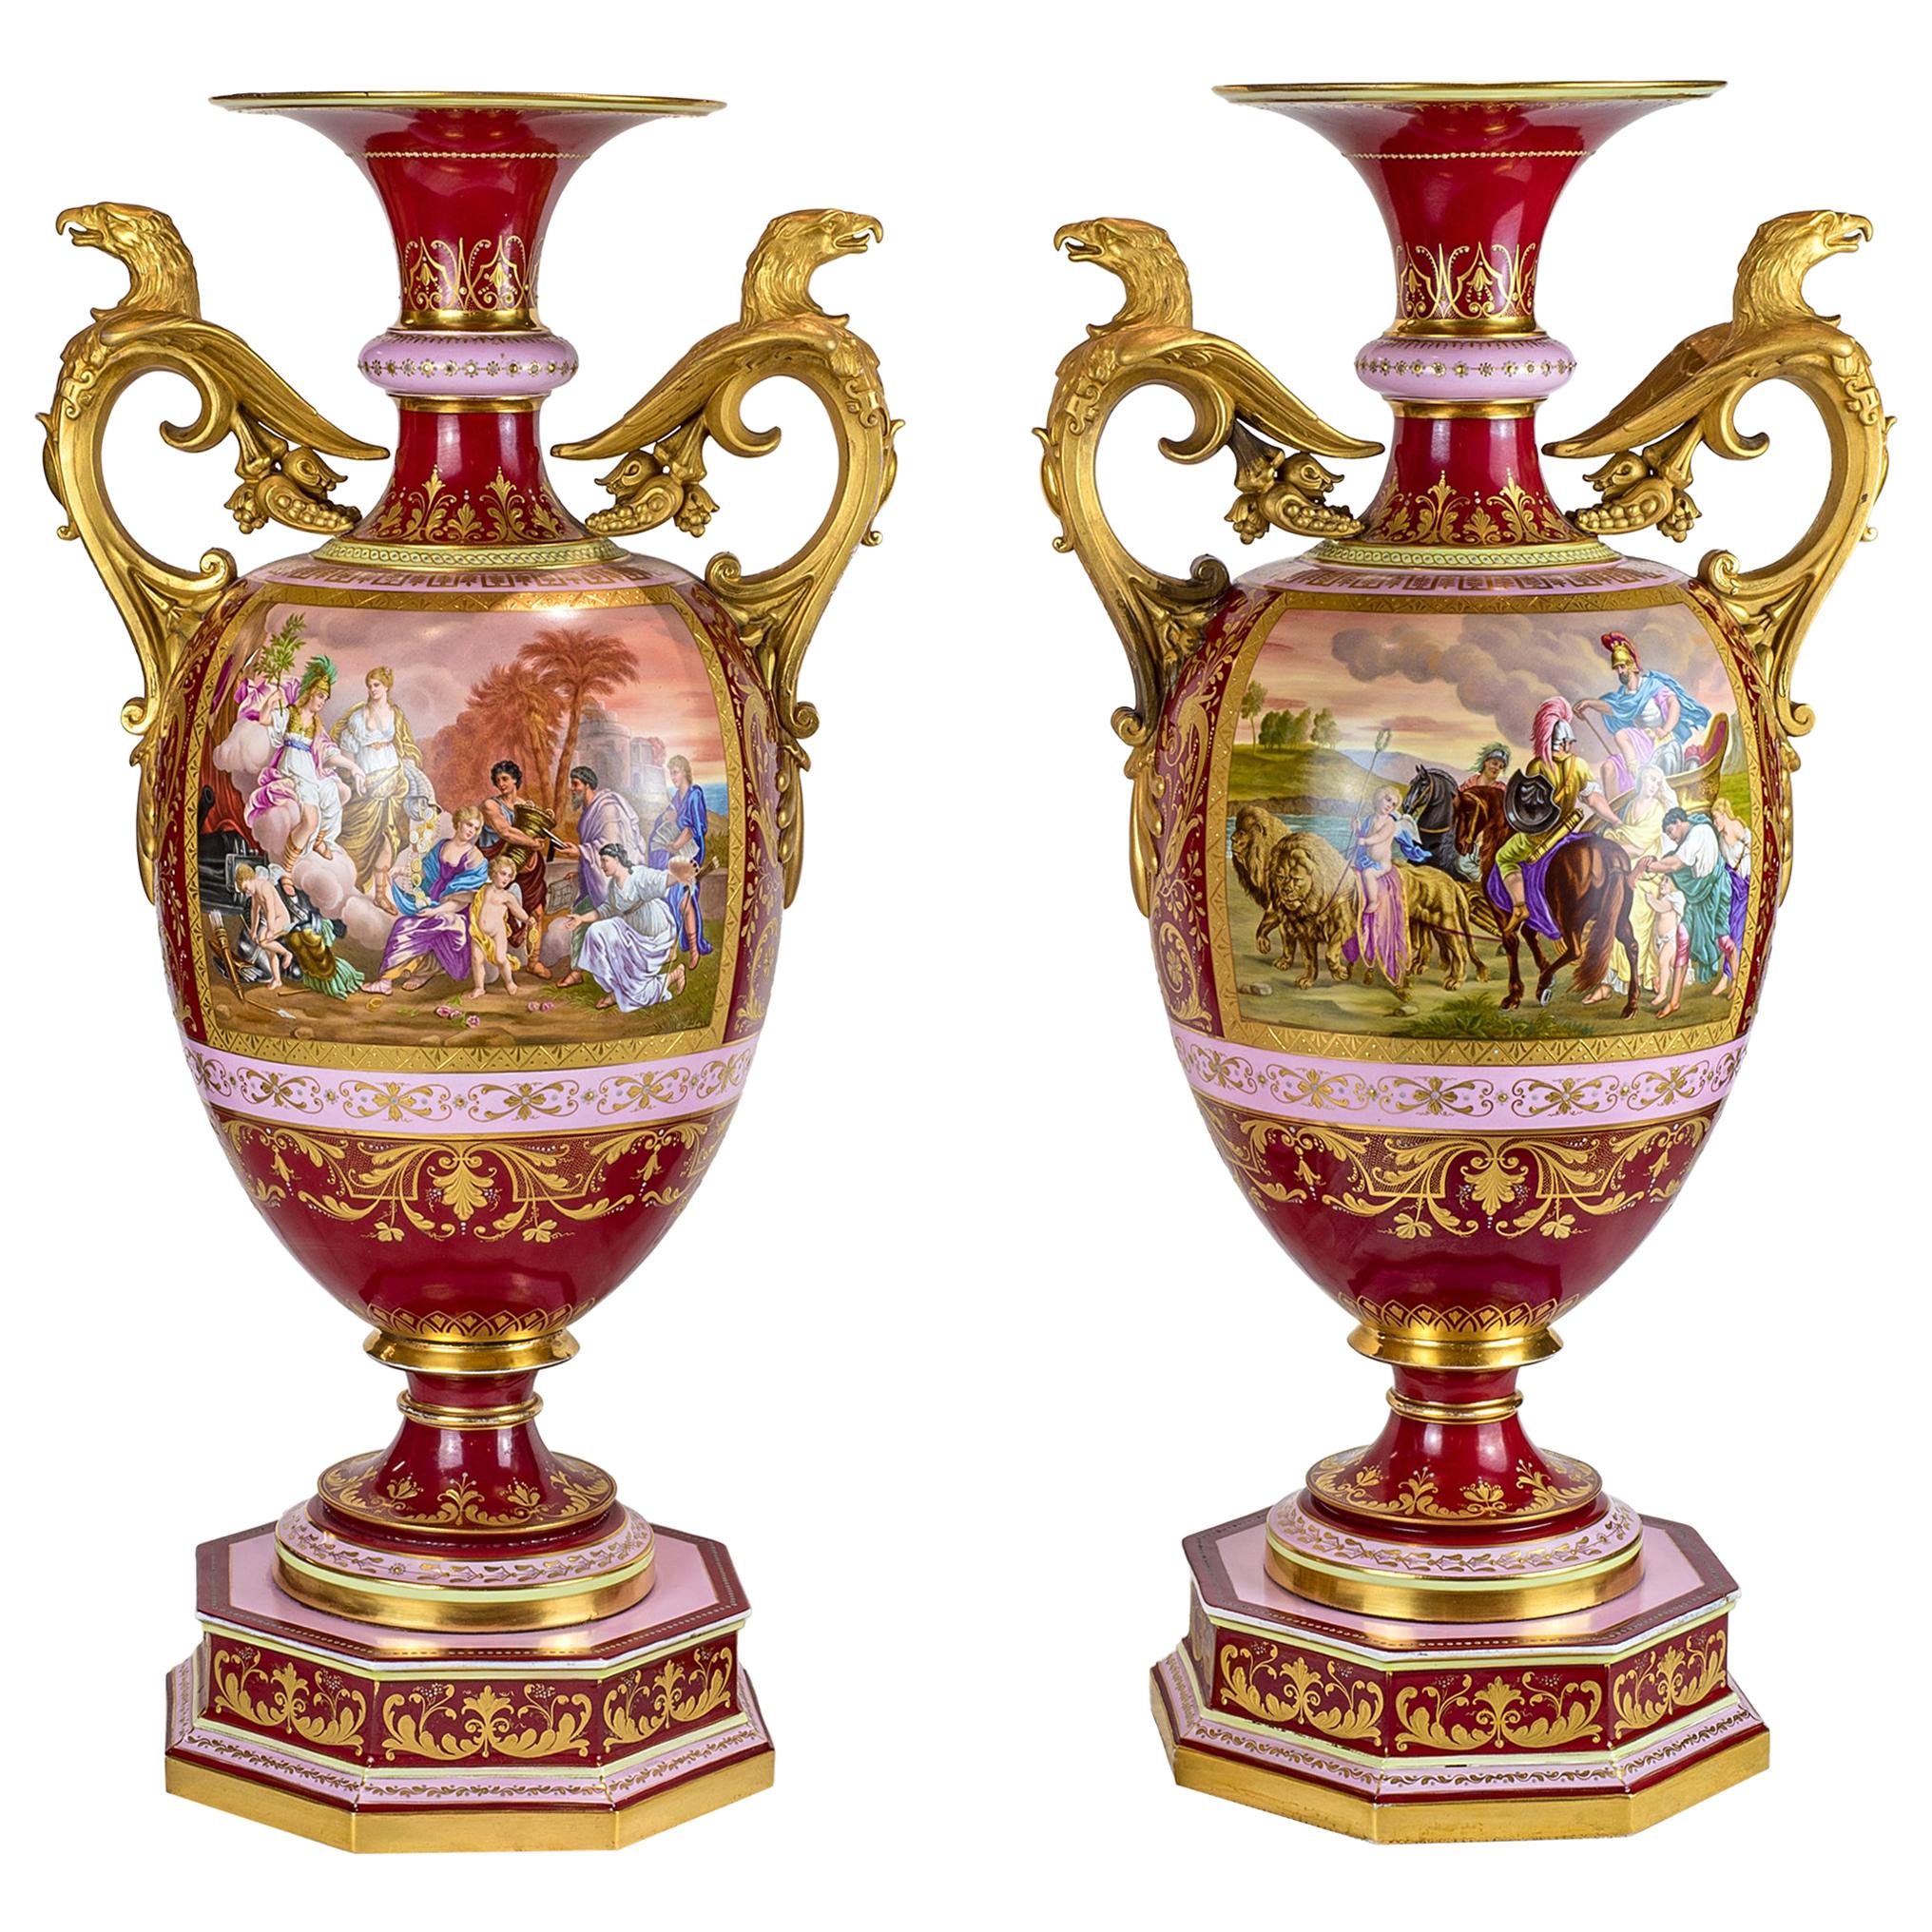 Magnificent Pair of Royal Vienna-Style Gilt Bronze Mounted Porcelain Urns